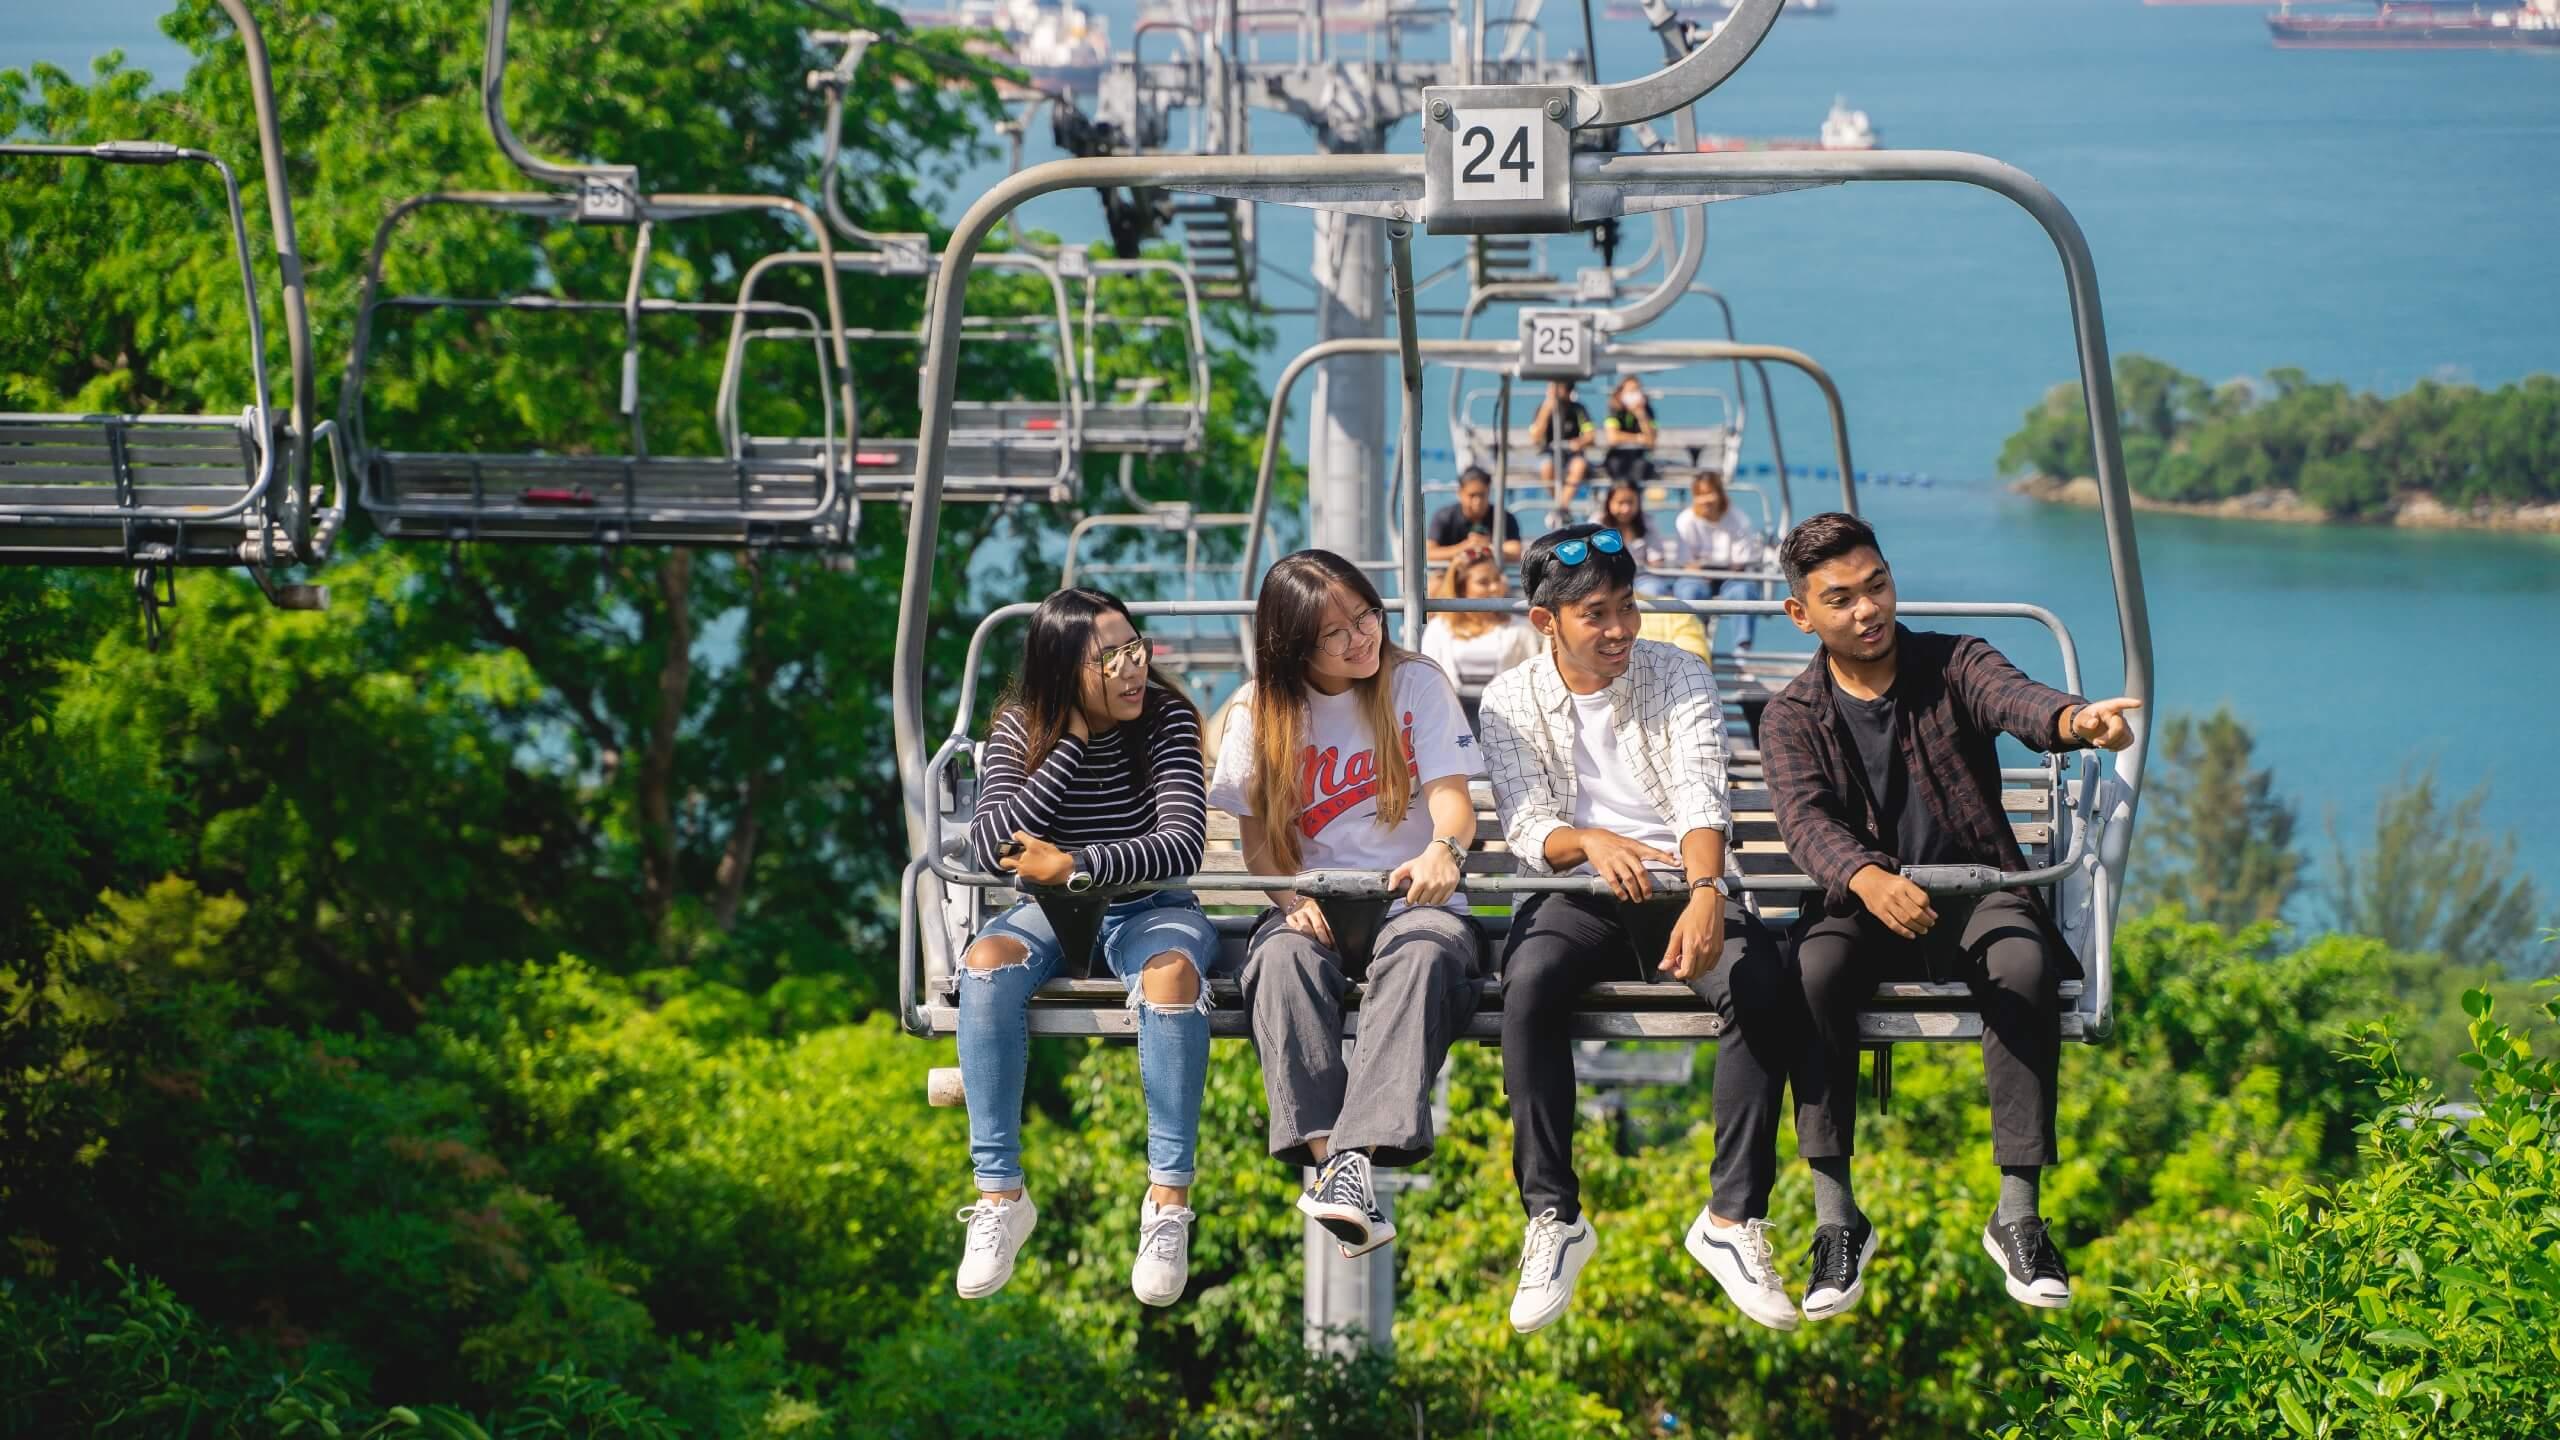 A group of friends point and look at something whilst riding the Skyride chairlift at Skyline Luge Singapore.